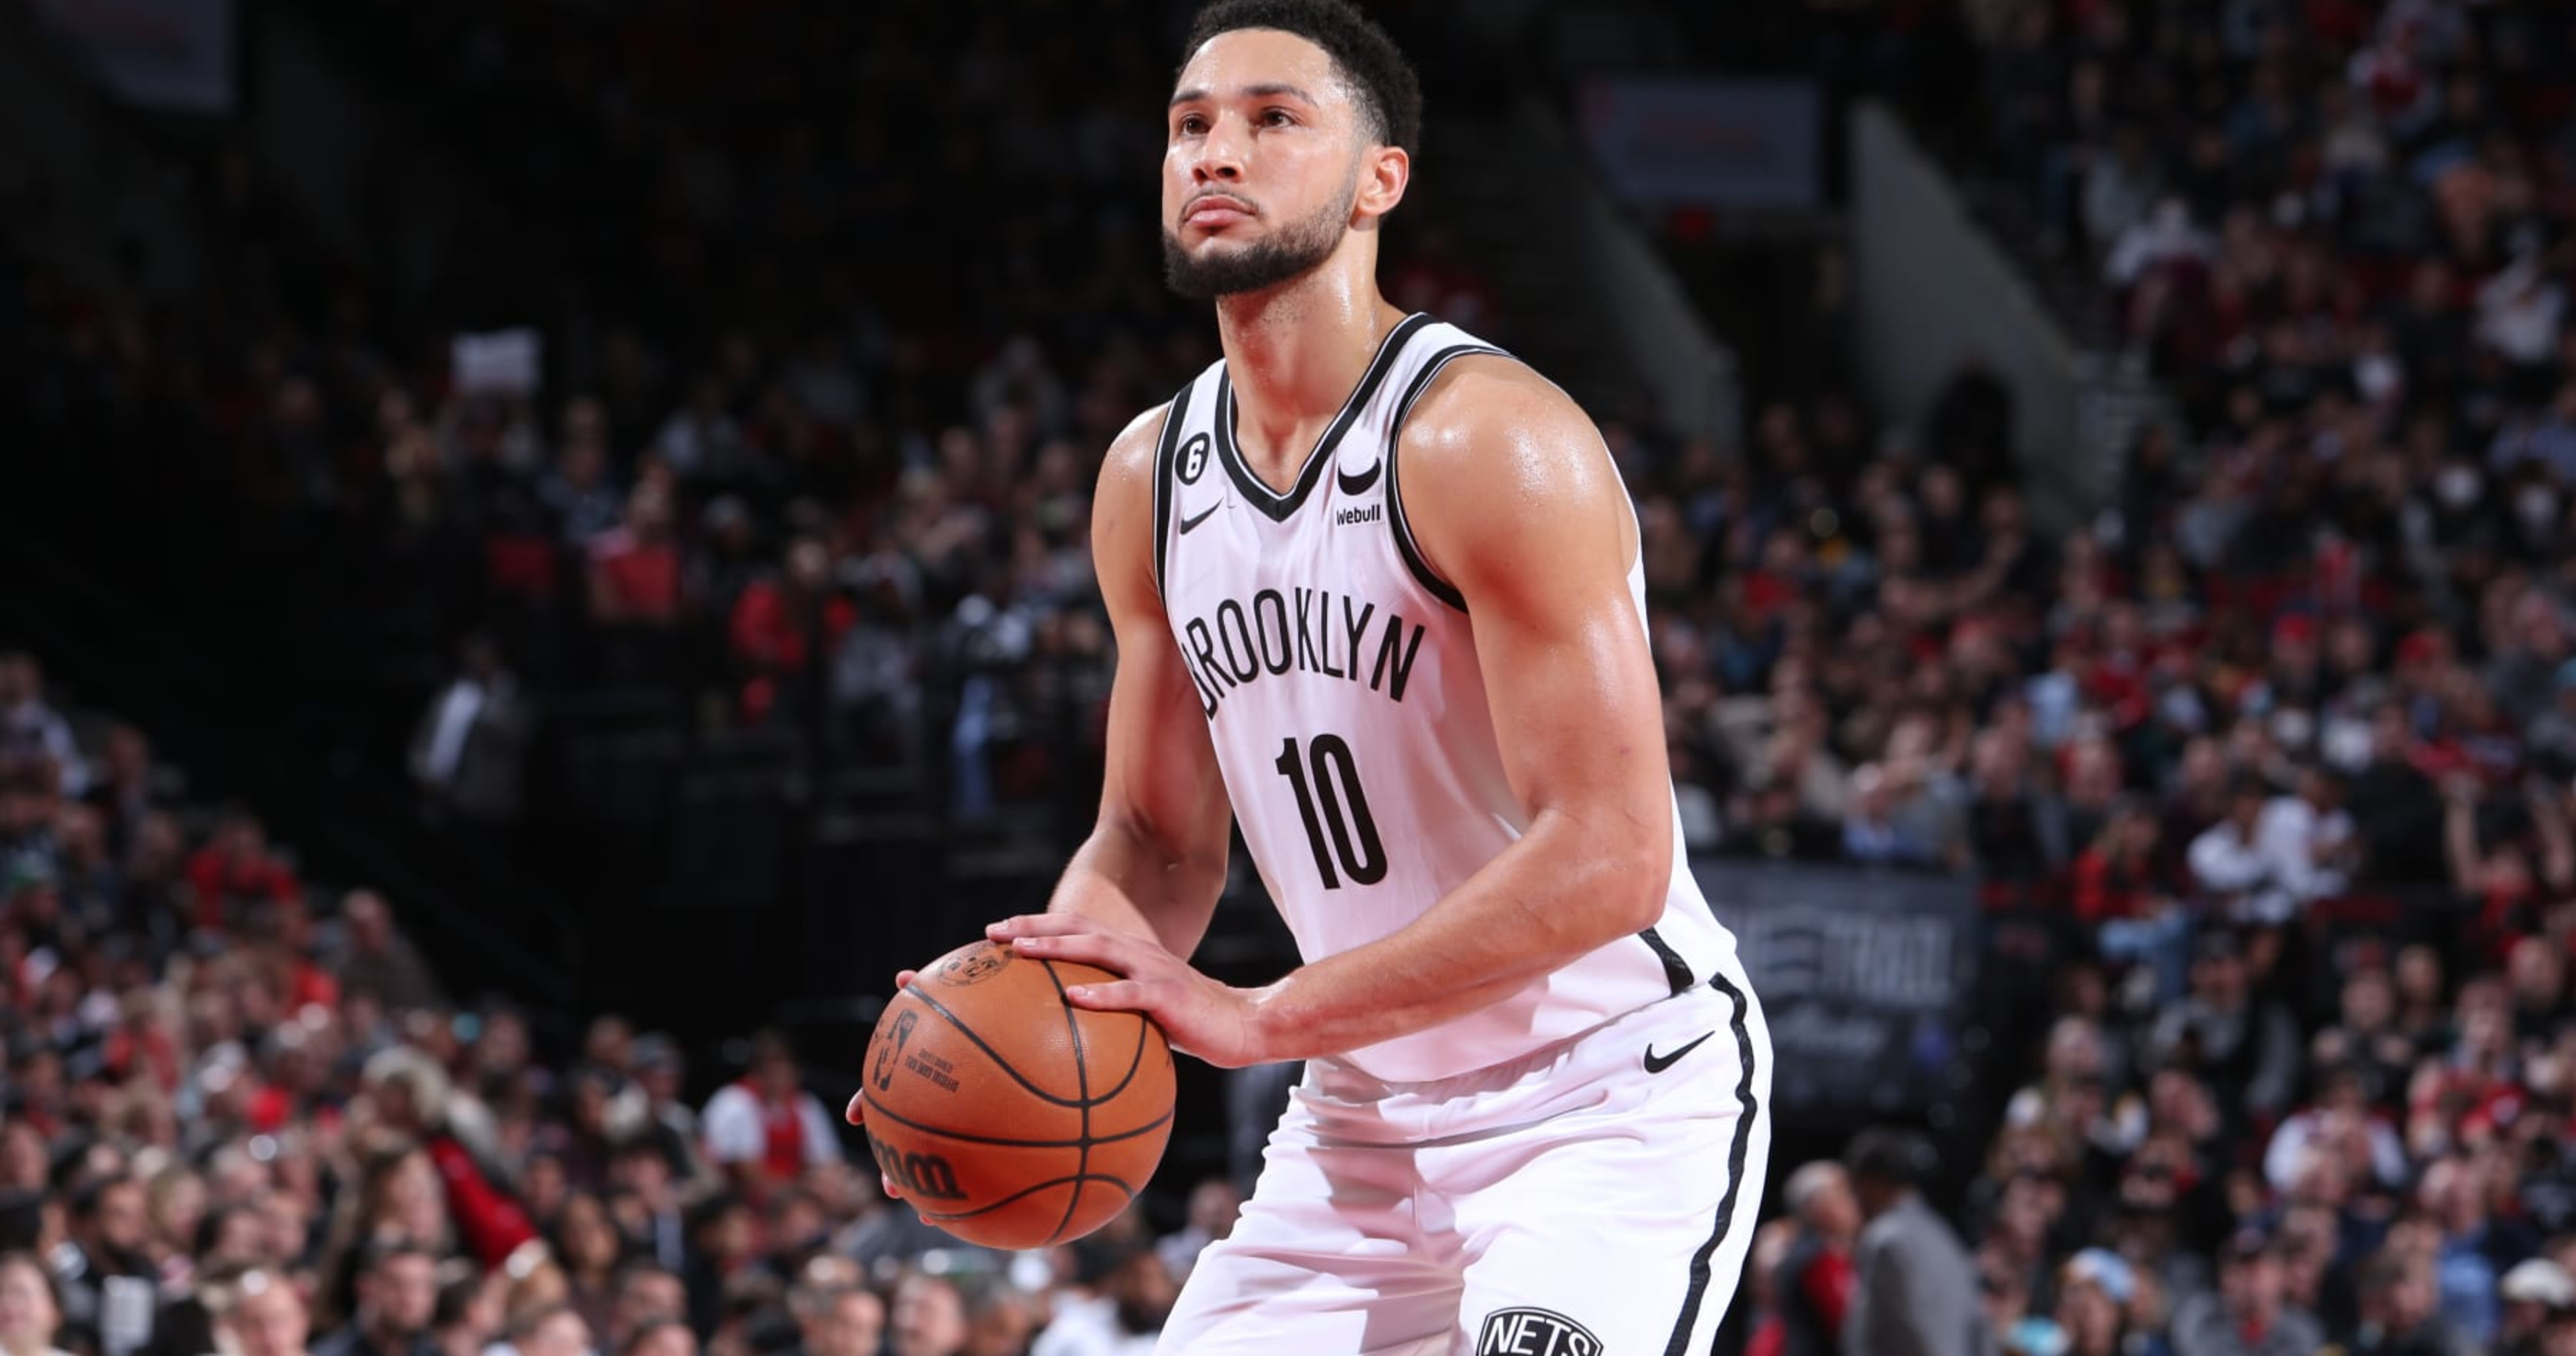 After year of taunts and insults, Nets' star Ben Simmons is ready